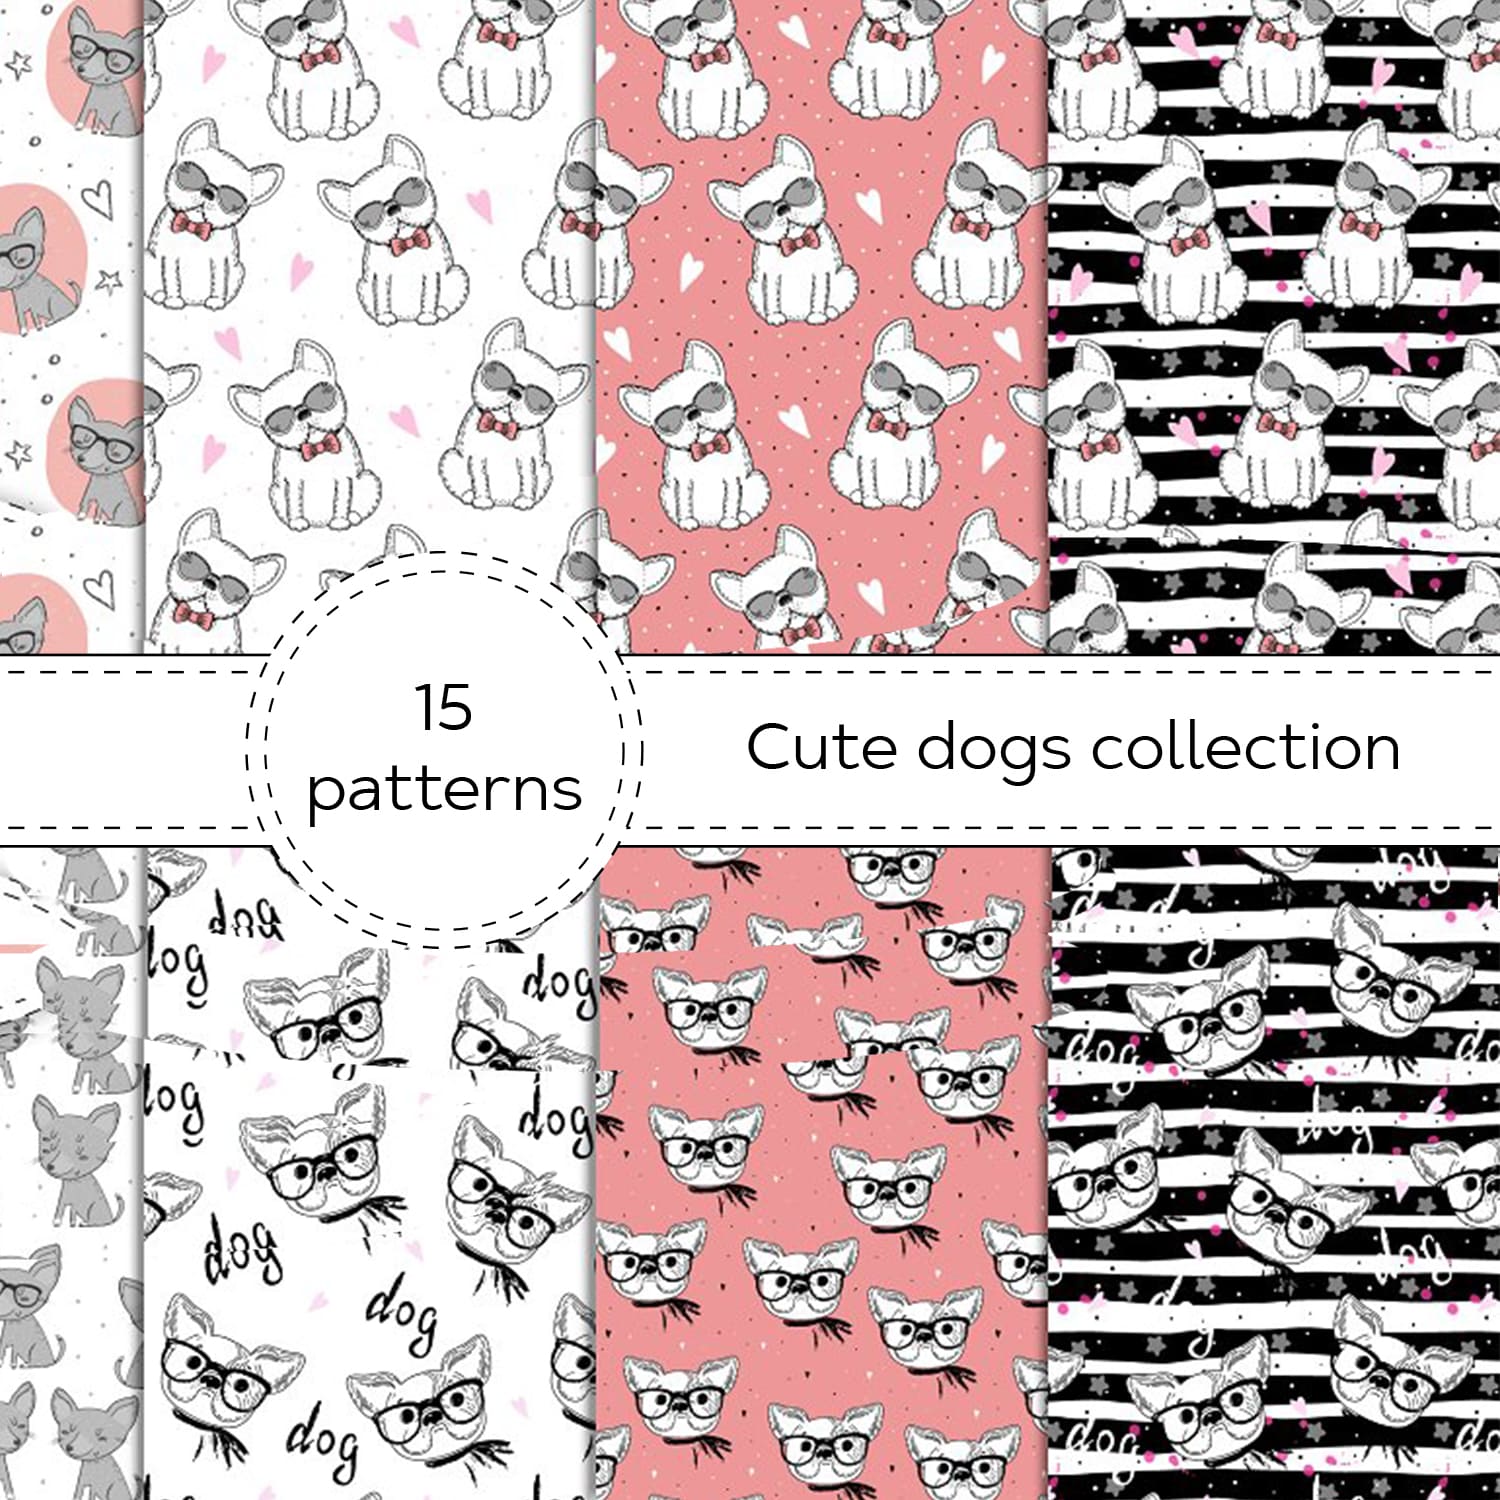 Cute dogs collection!.